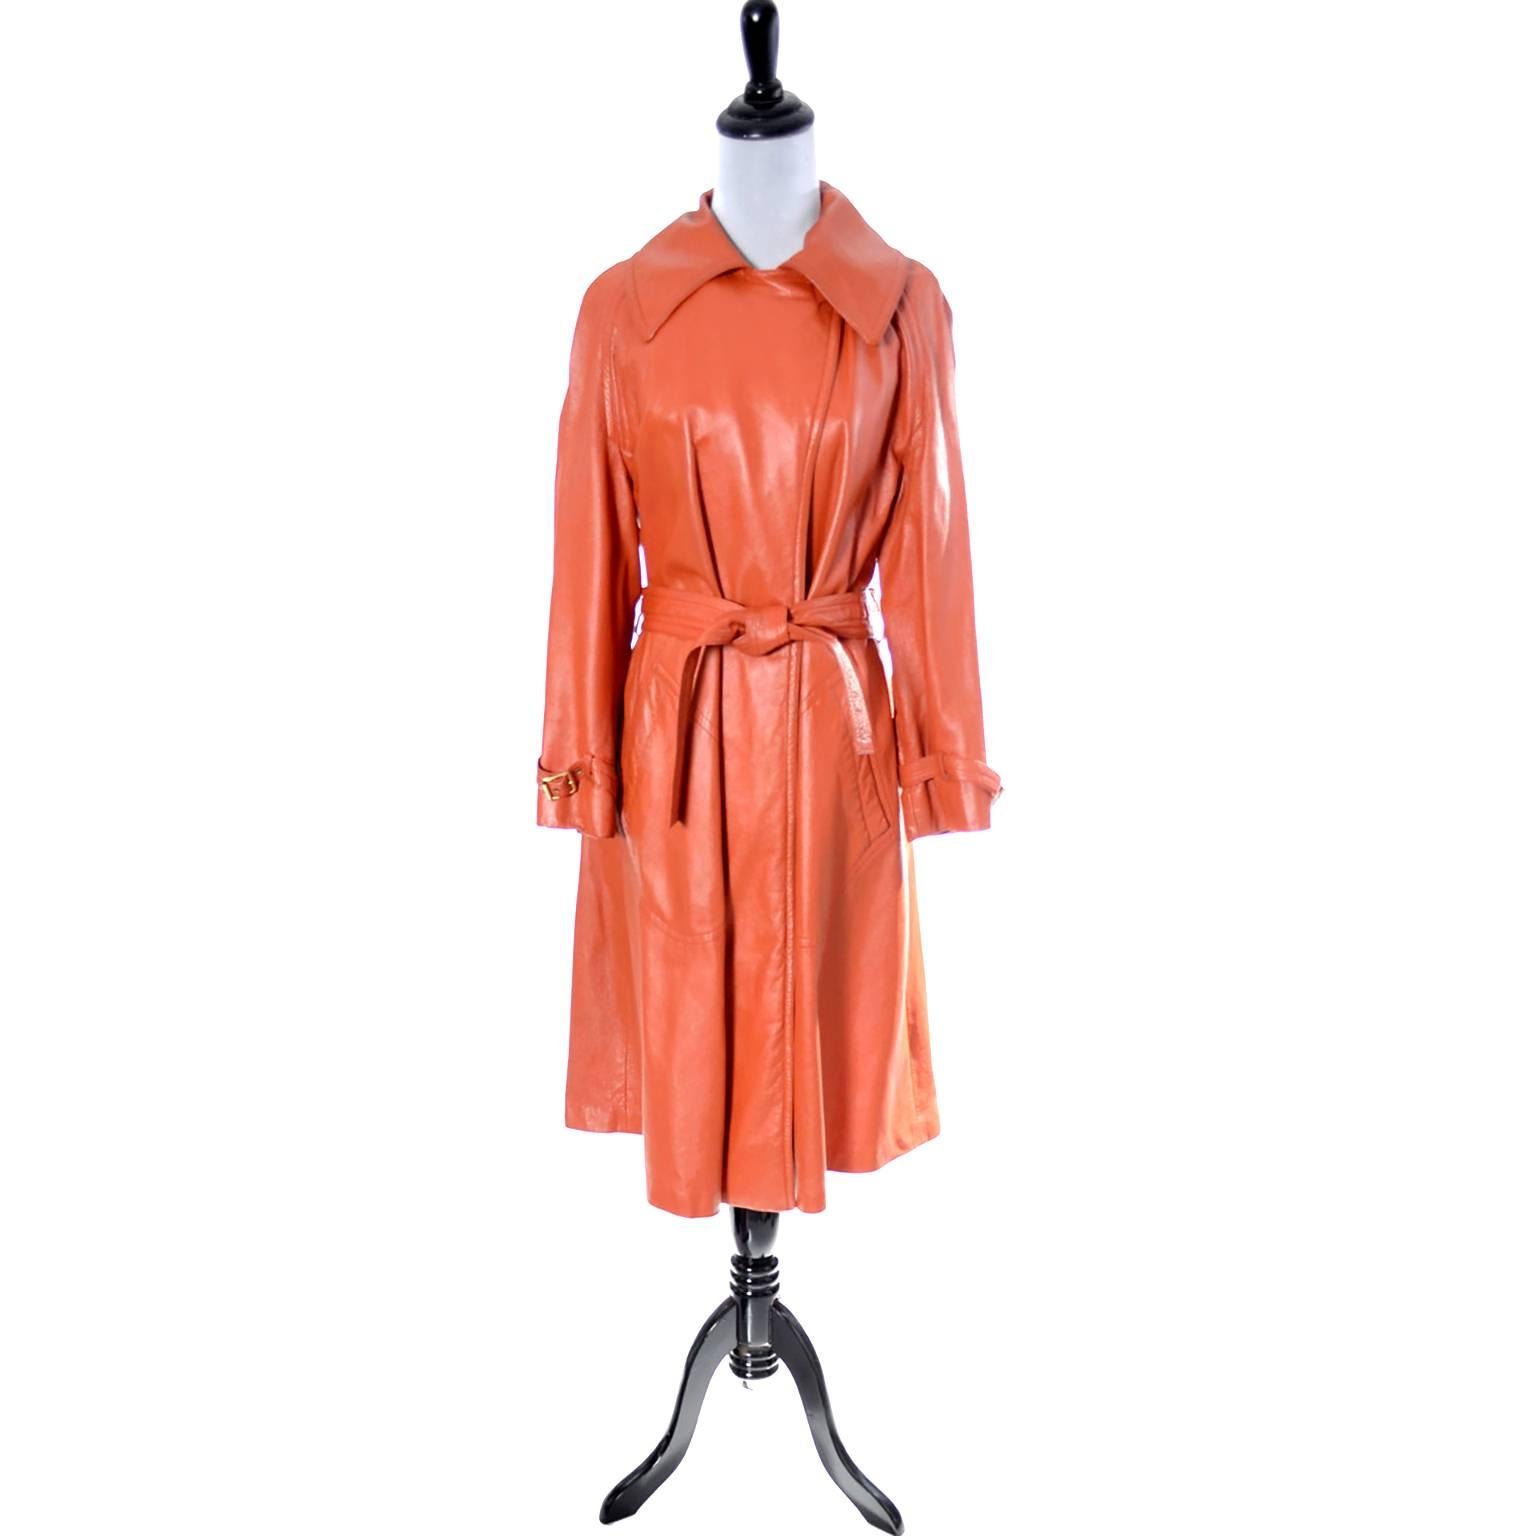 This orange leather Bonnie Cashin coat for Sills is from the late 1960s or early 1970s. It comes with its original belt, has great front slit pockets, is fully lined and has buckles on the sleeves and one to close the neck as shown in the photo. 